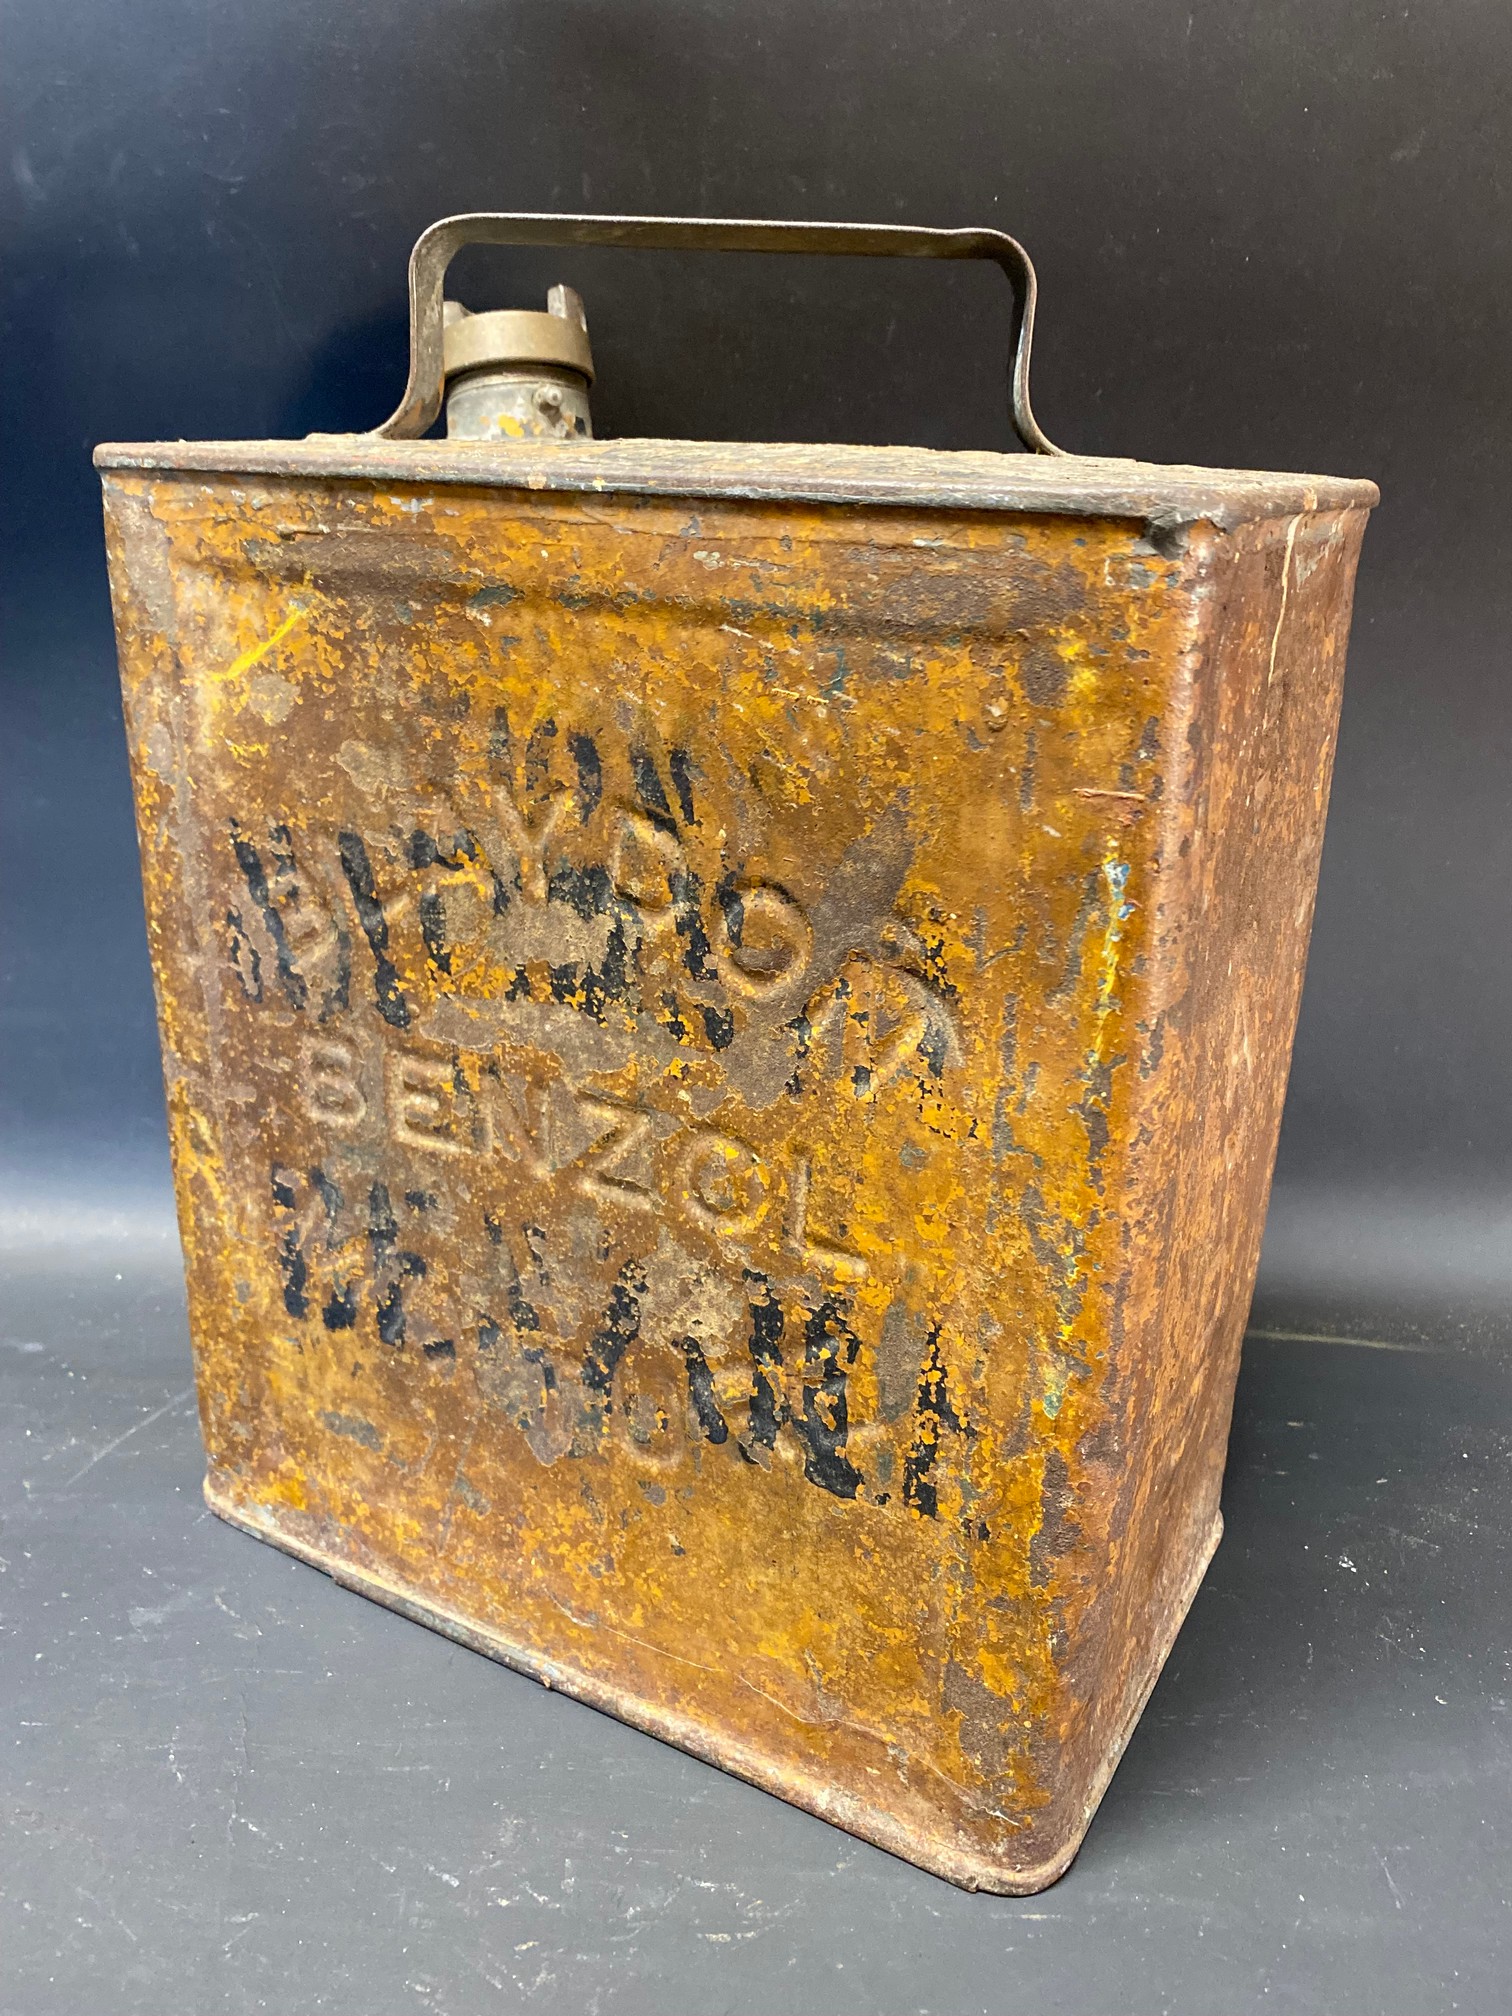 A Blaydon Benzole Mixture rebranded as National Benzole two gallon petrol can by Grant of London, - Image 2 of 4